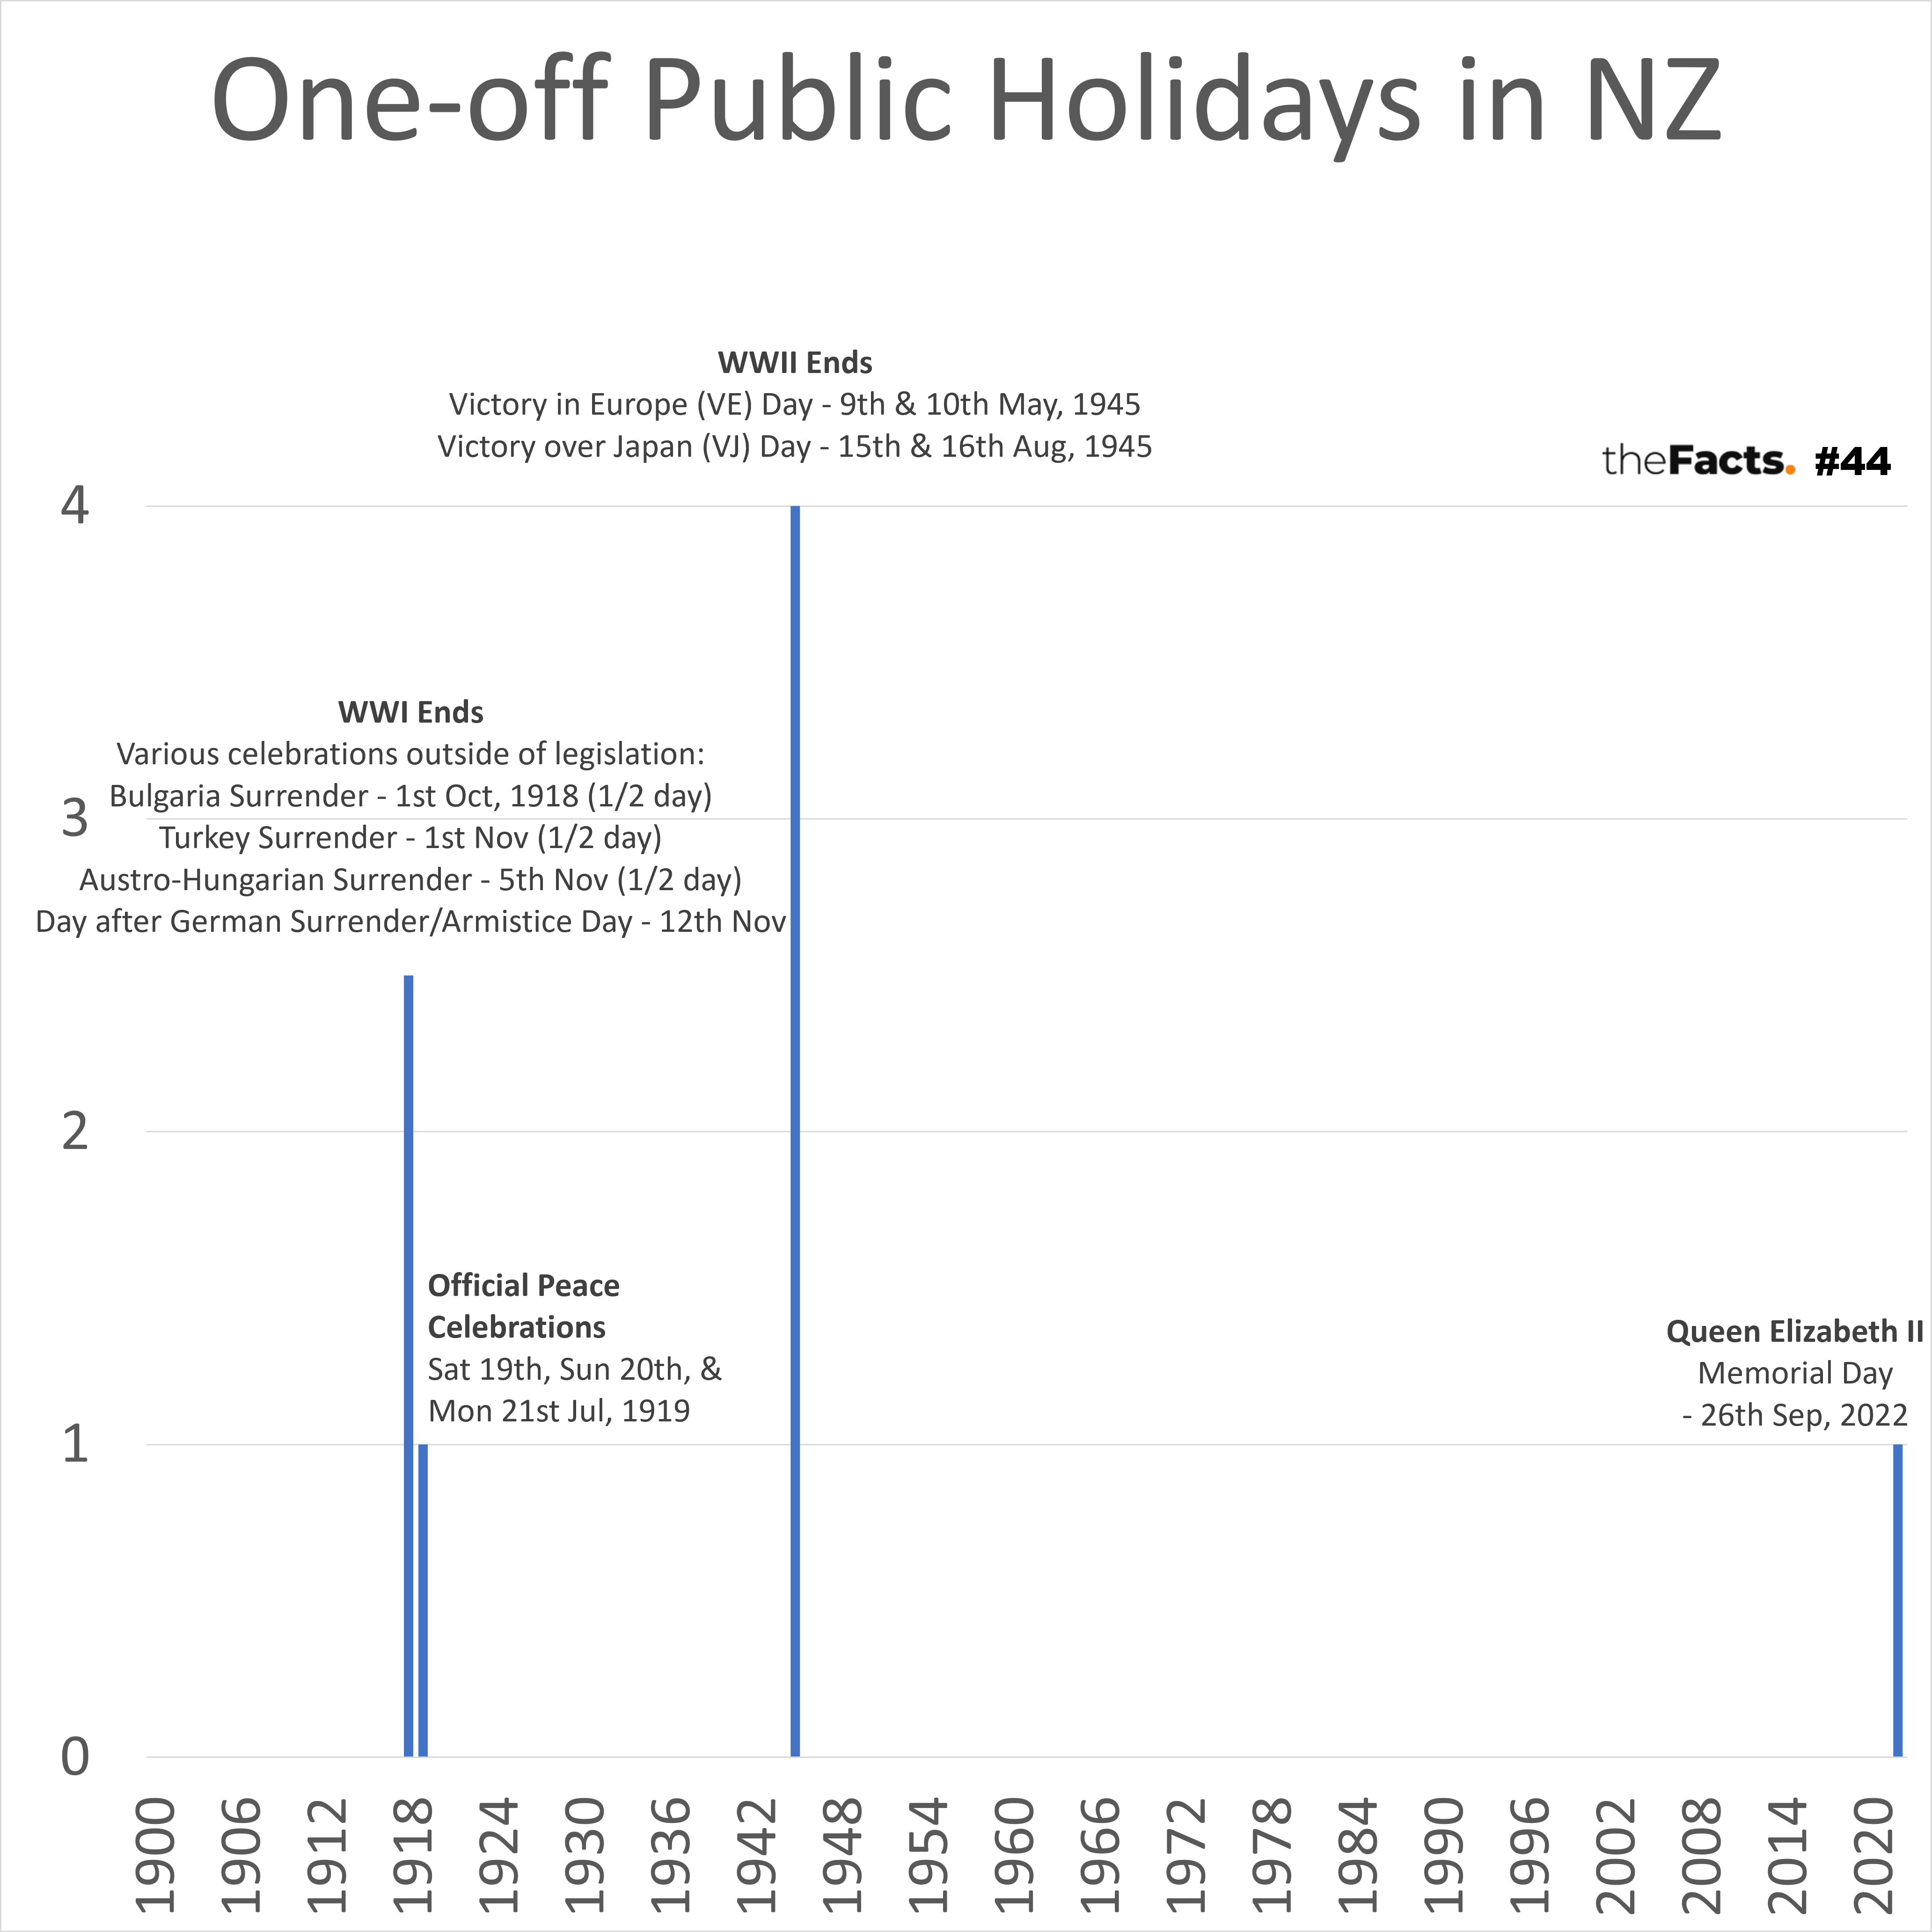 First oneoff public holiday in 77 years (since WWII) theFacts.